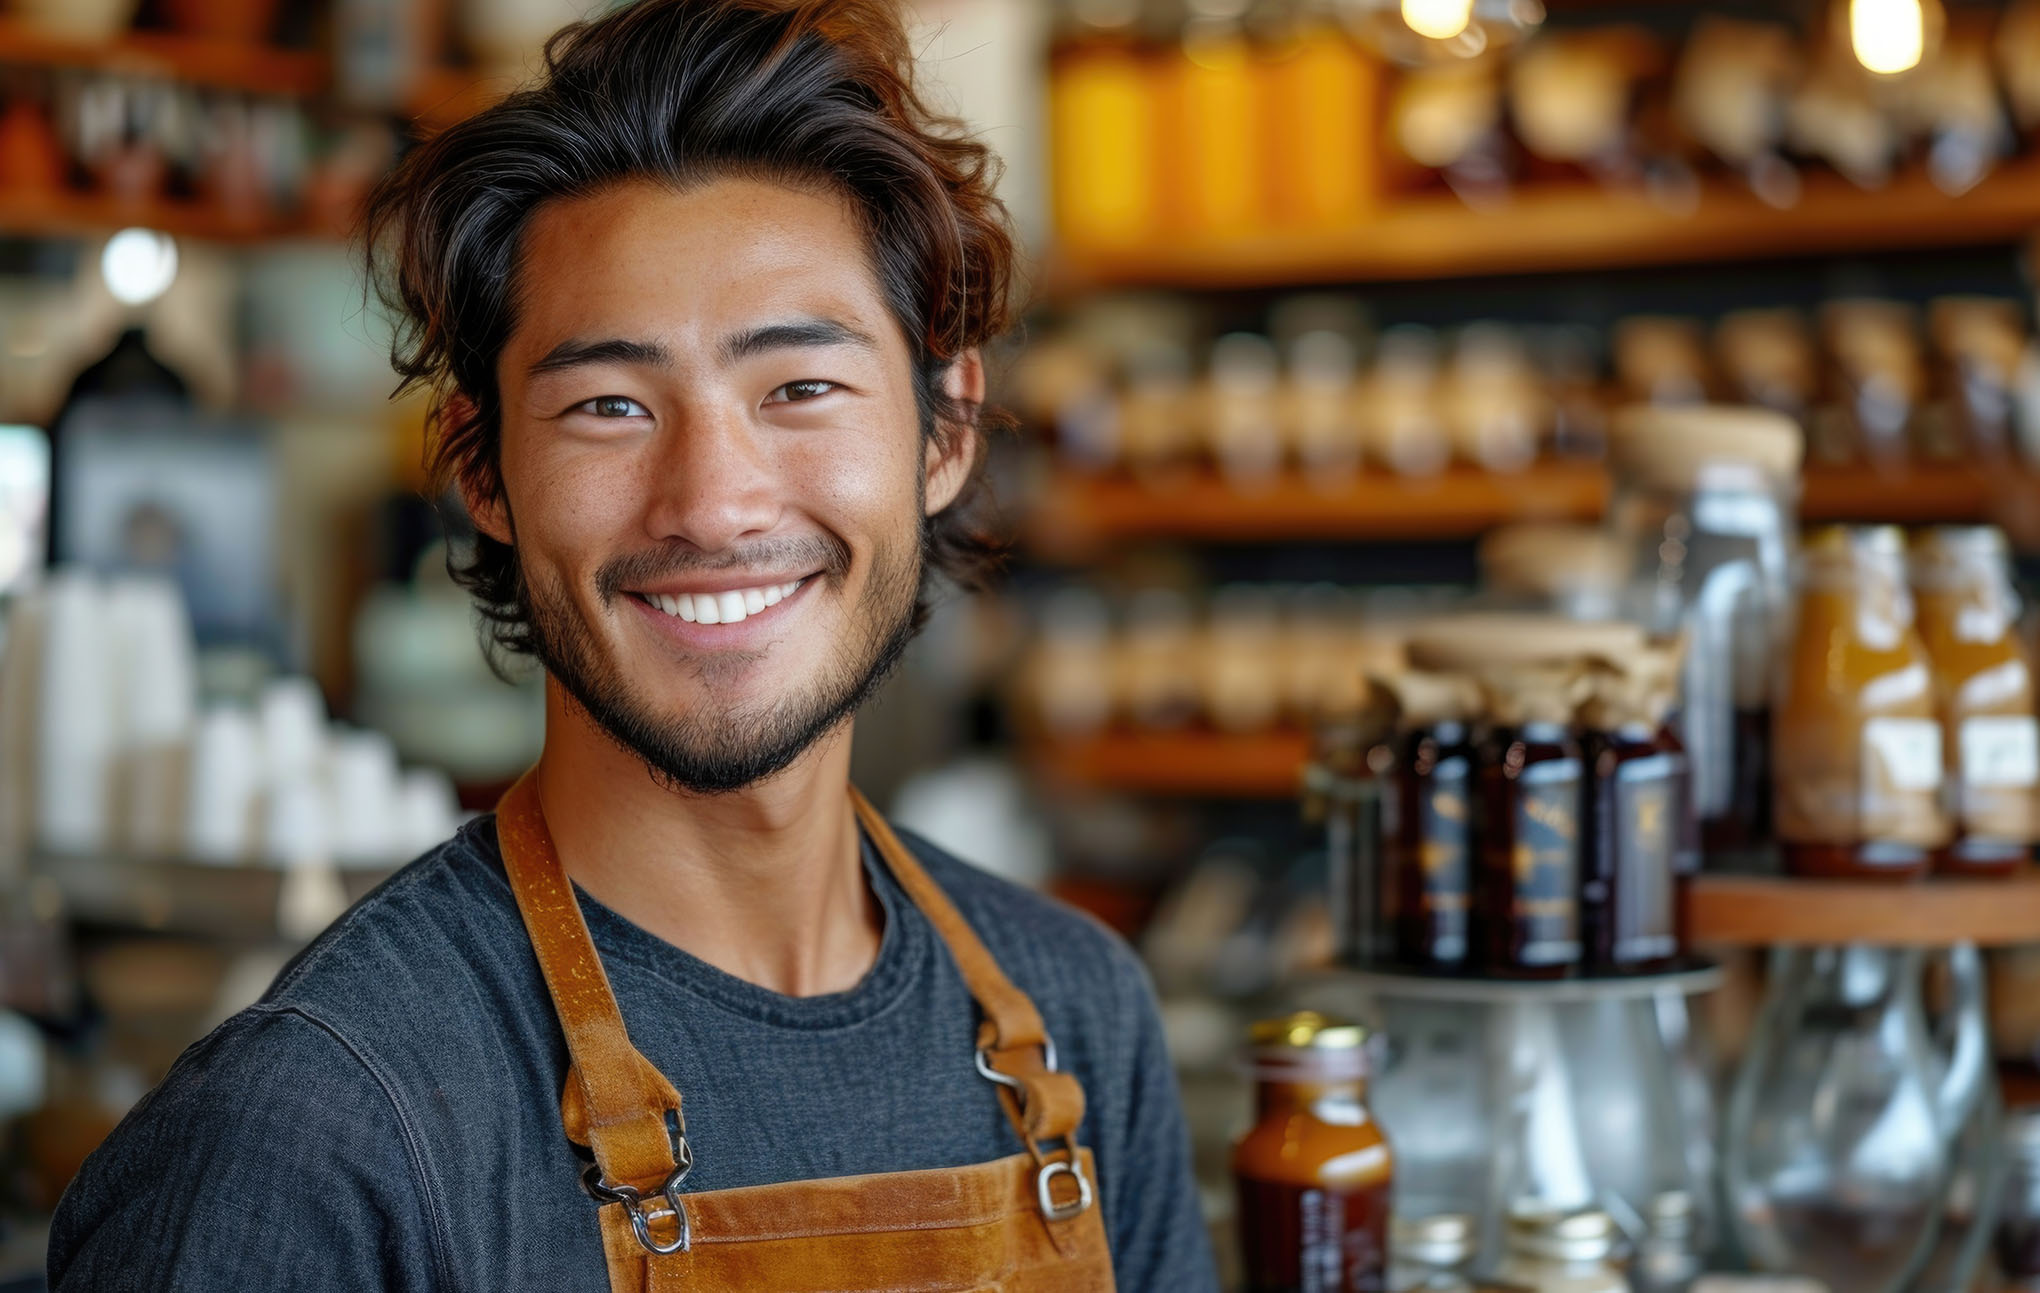 A cheerful asian man with a beard, wearing a brown apron and standing in a cozy café surrounded by shelves filled with jars and bottles. he has a friendly smile, looking directly at the camera.